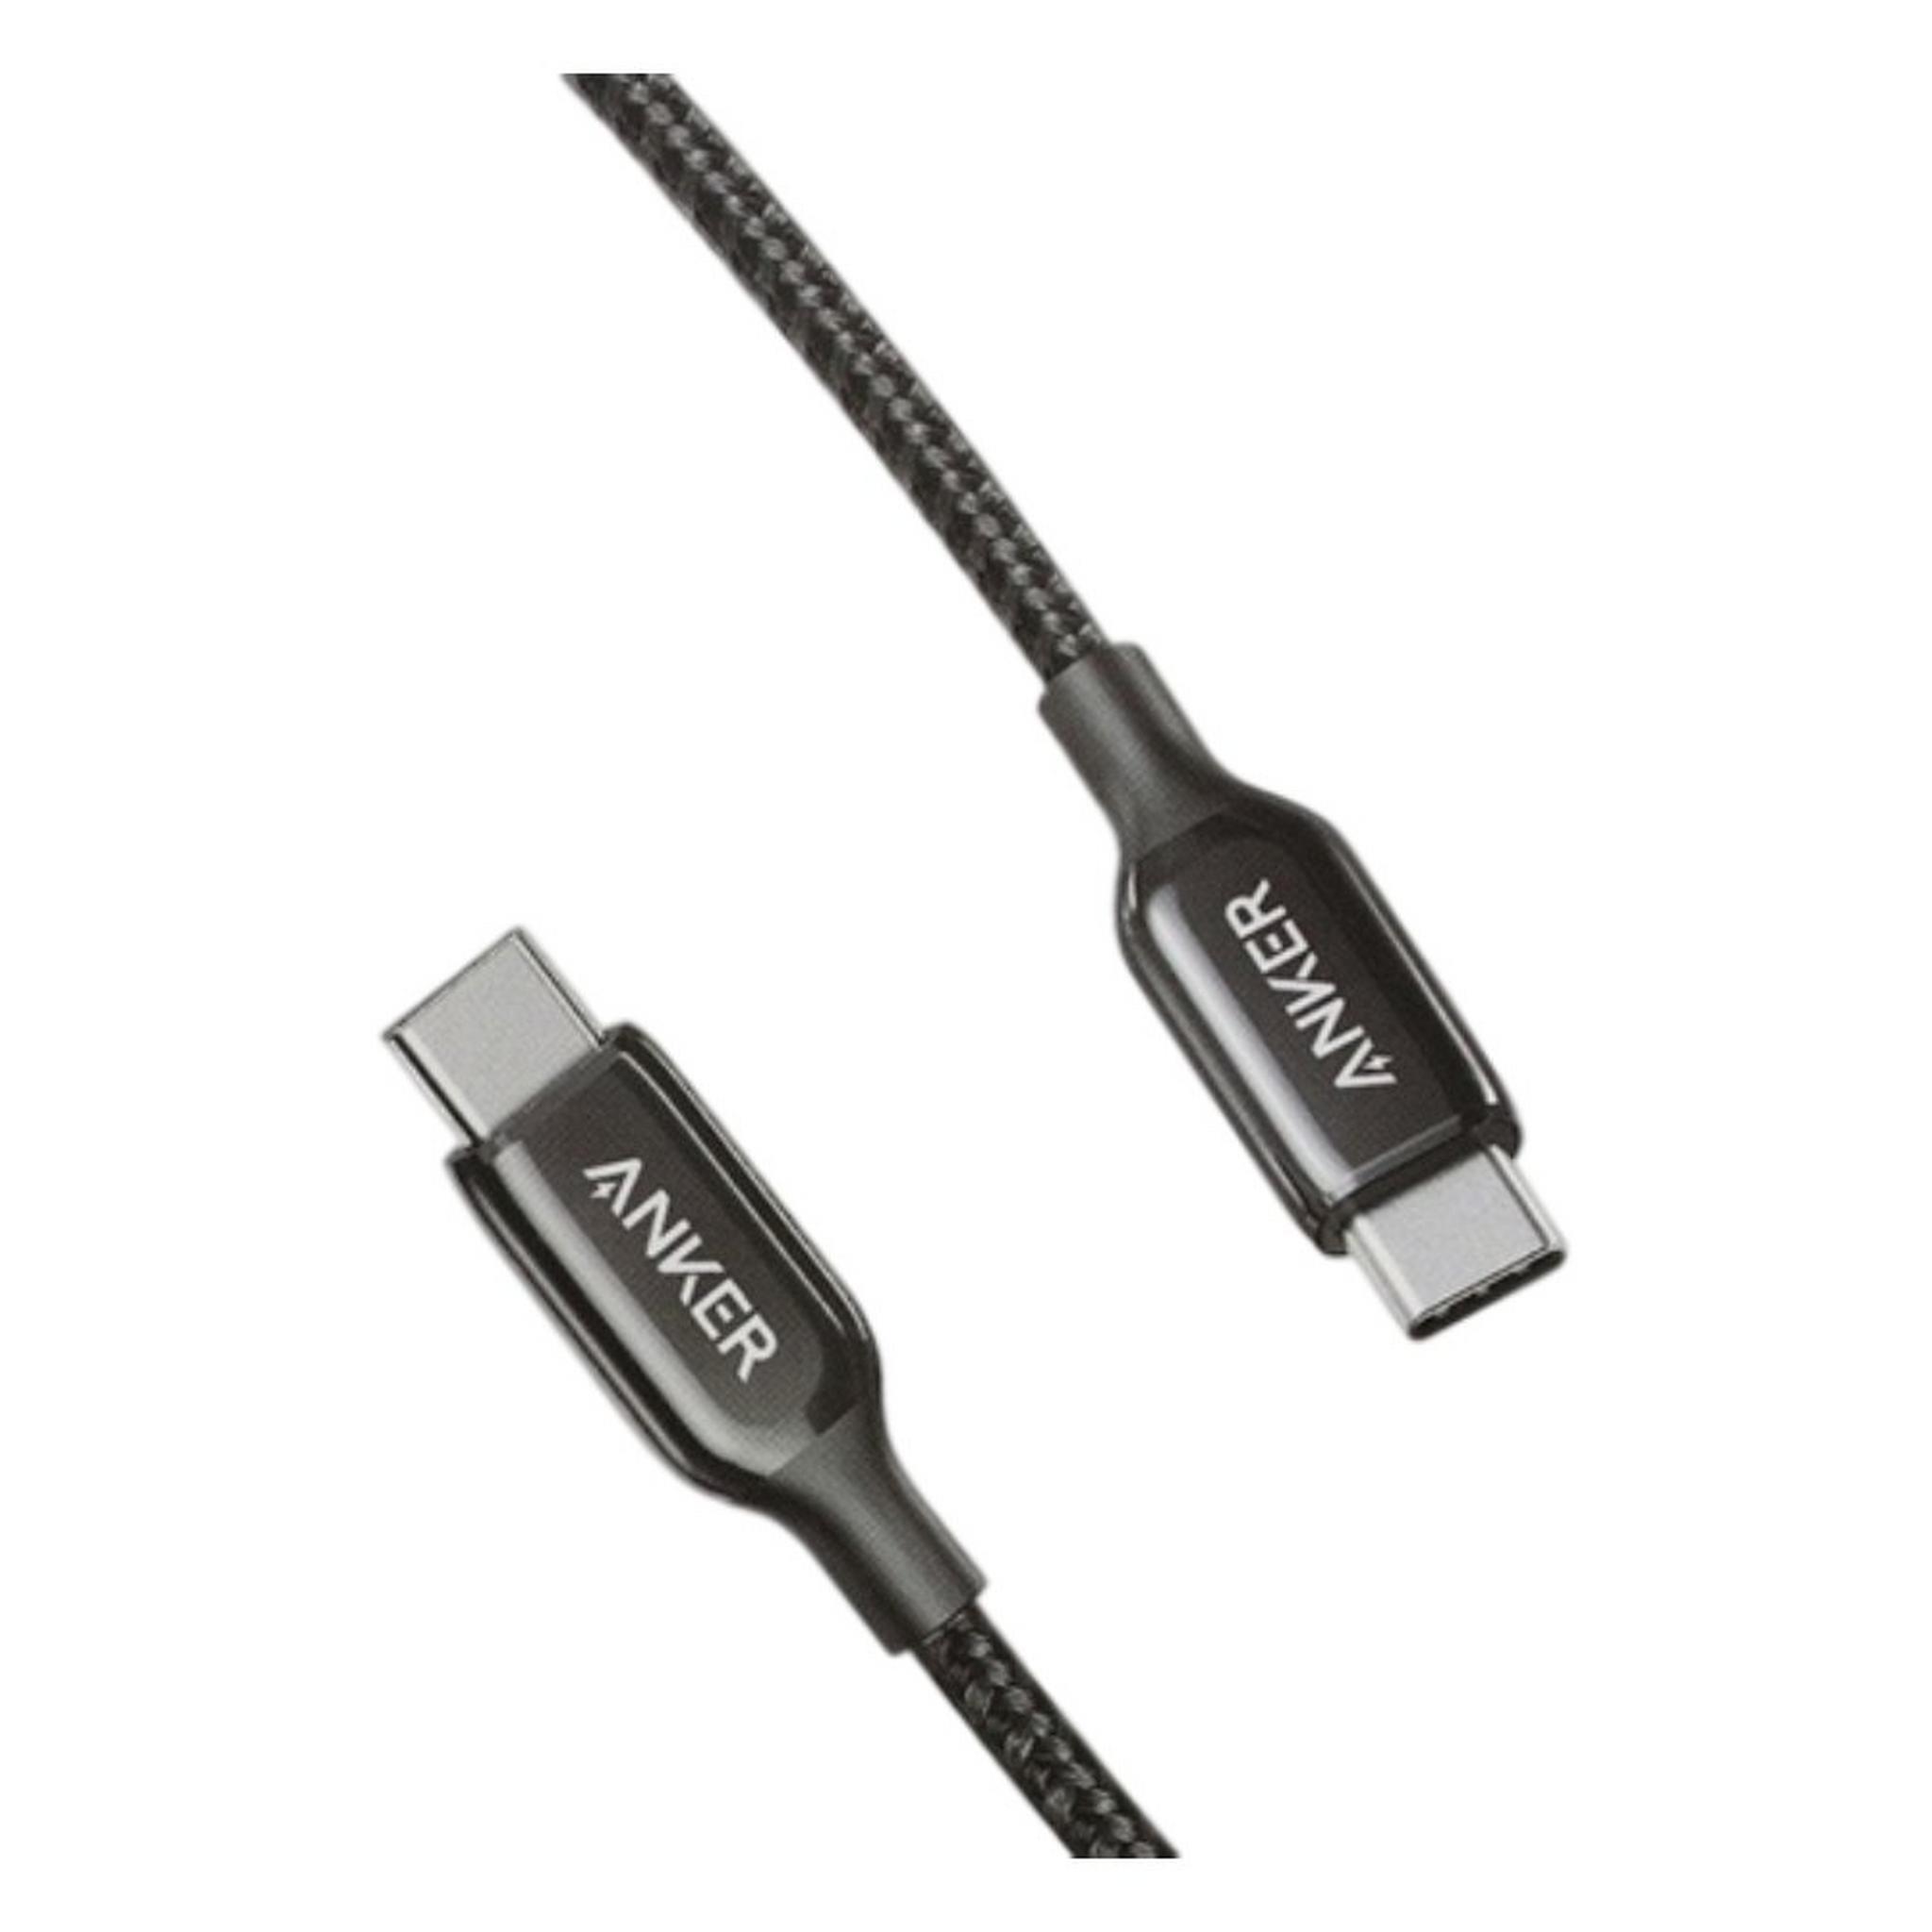 Anker Powerline USB-C to USB-C 3ft Cable - Black